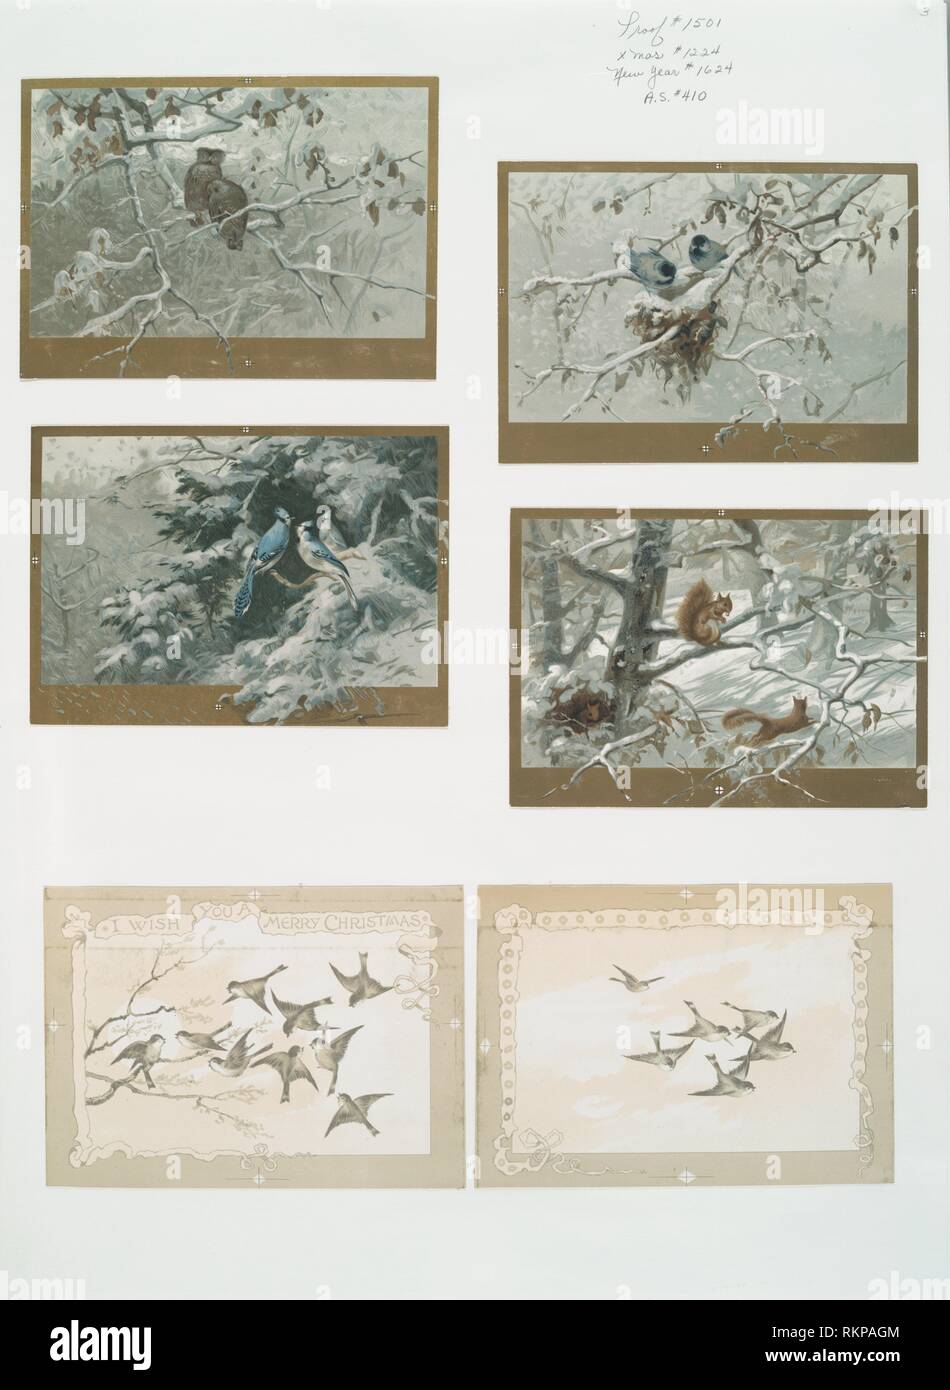 Christmas and New Year cards depicting winter scenes of the forest, squirrels and various birds including owls and blue jays. L. Prang & Co. Stock Photo